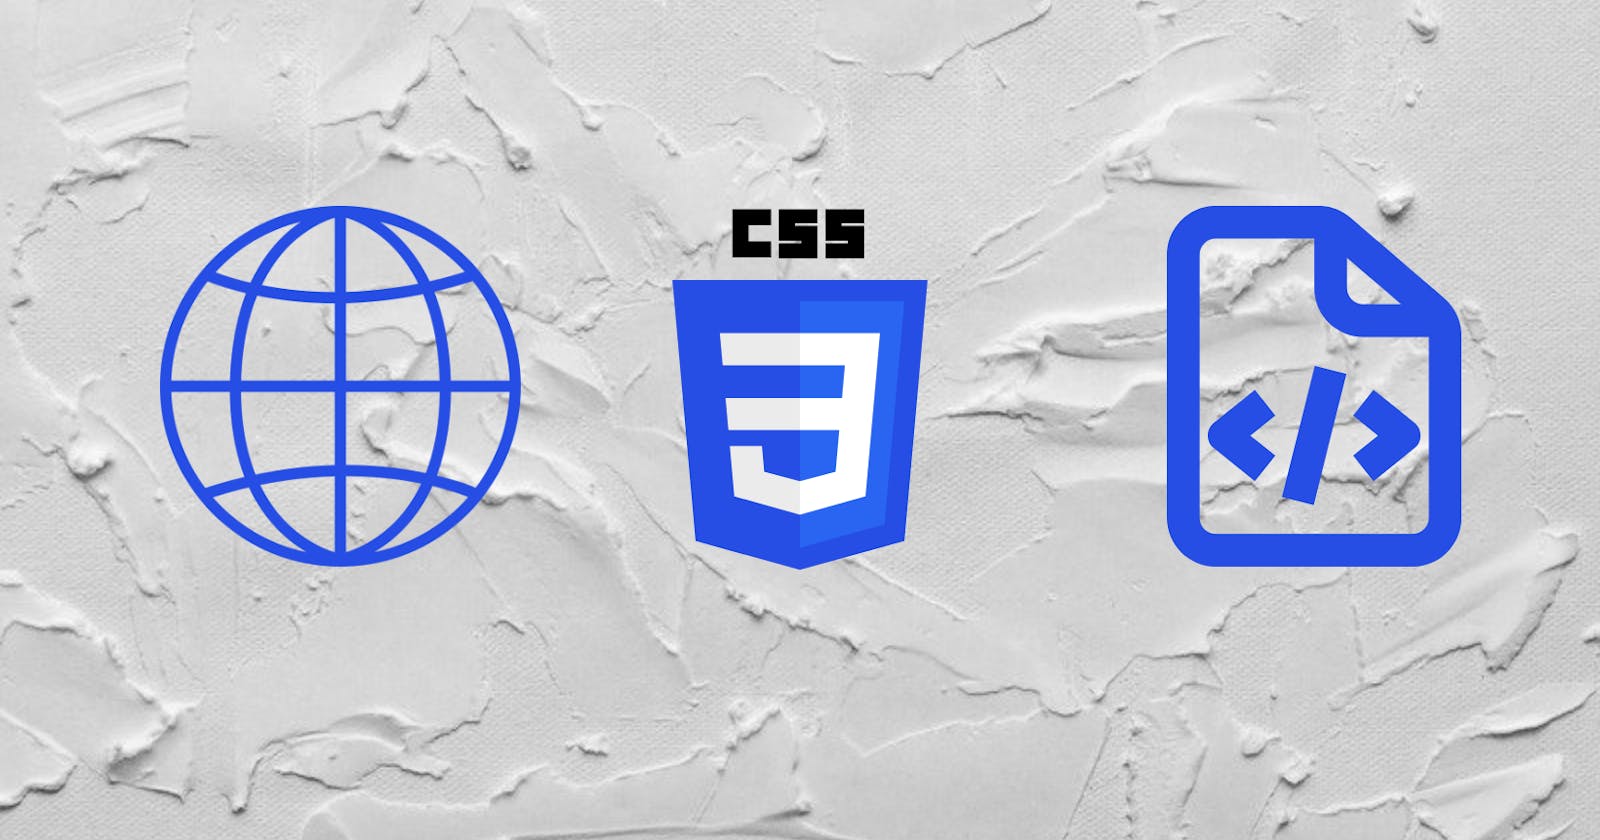 3 Ways to add CSS to your website